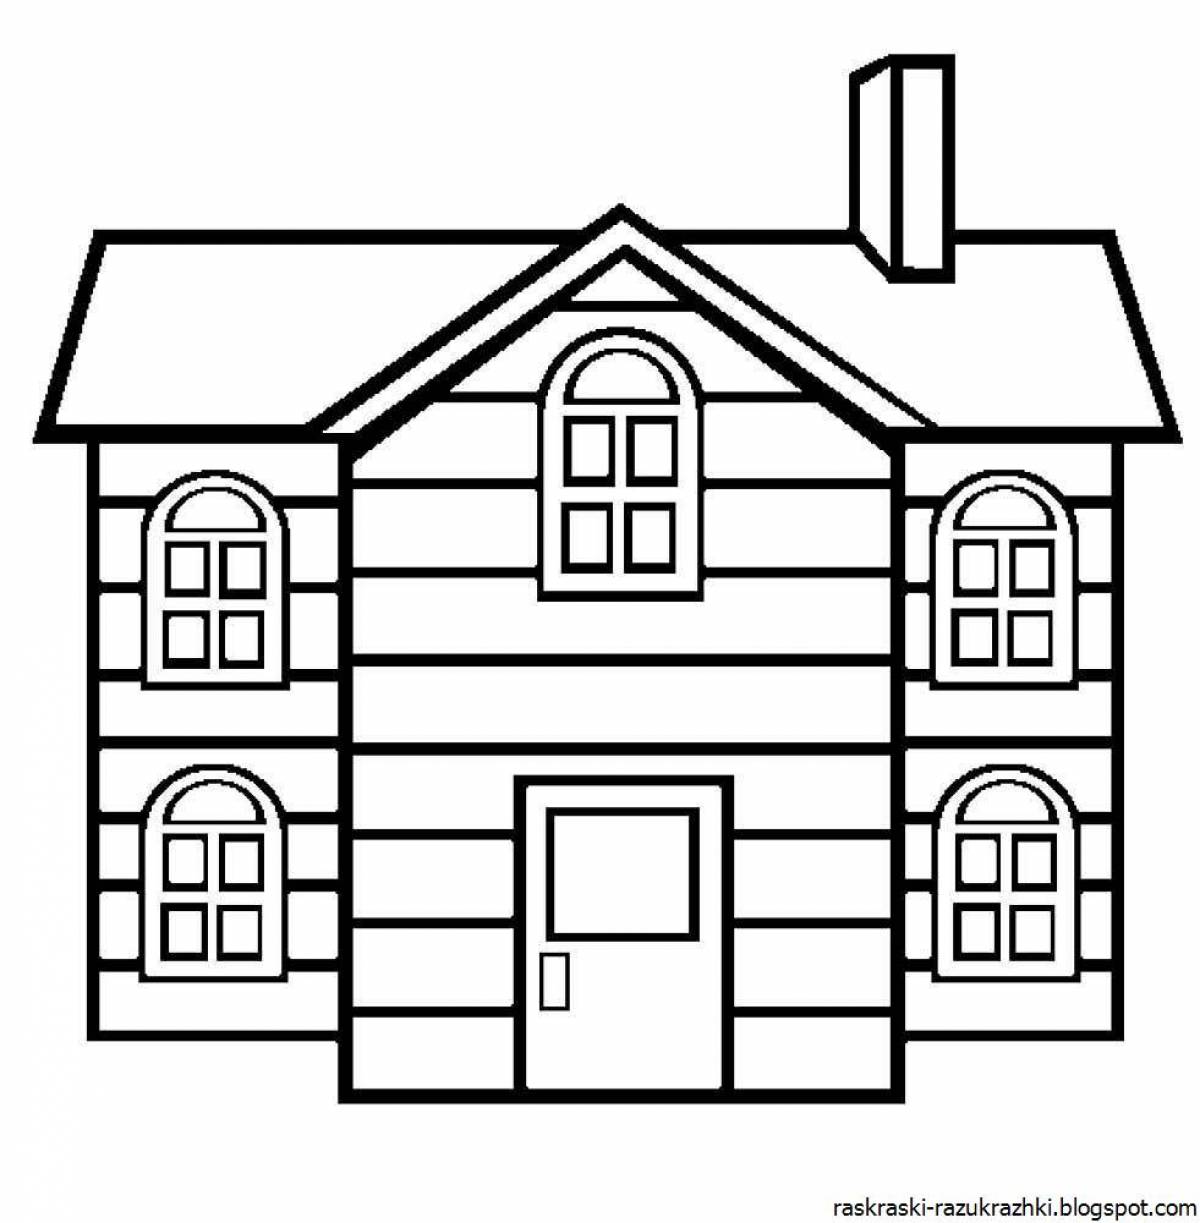 Coloring page dazzling house for kids